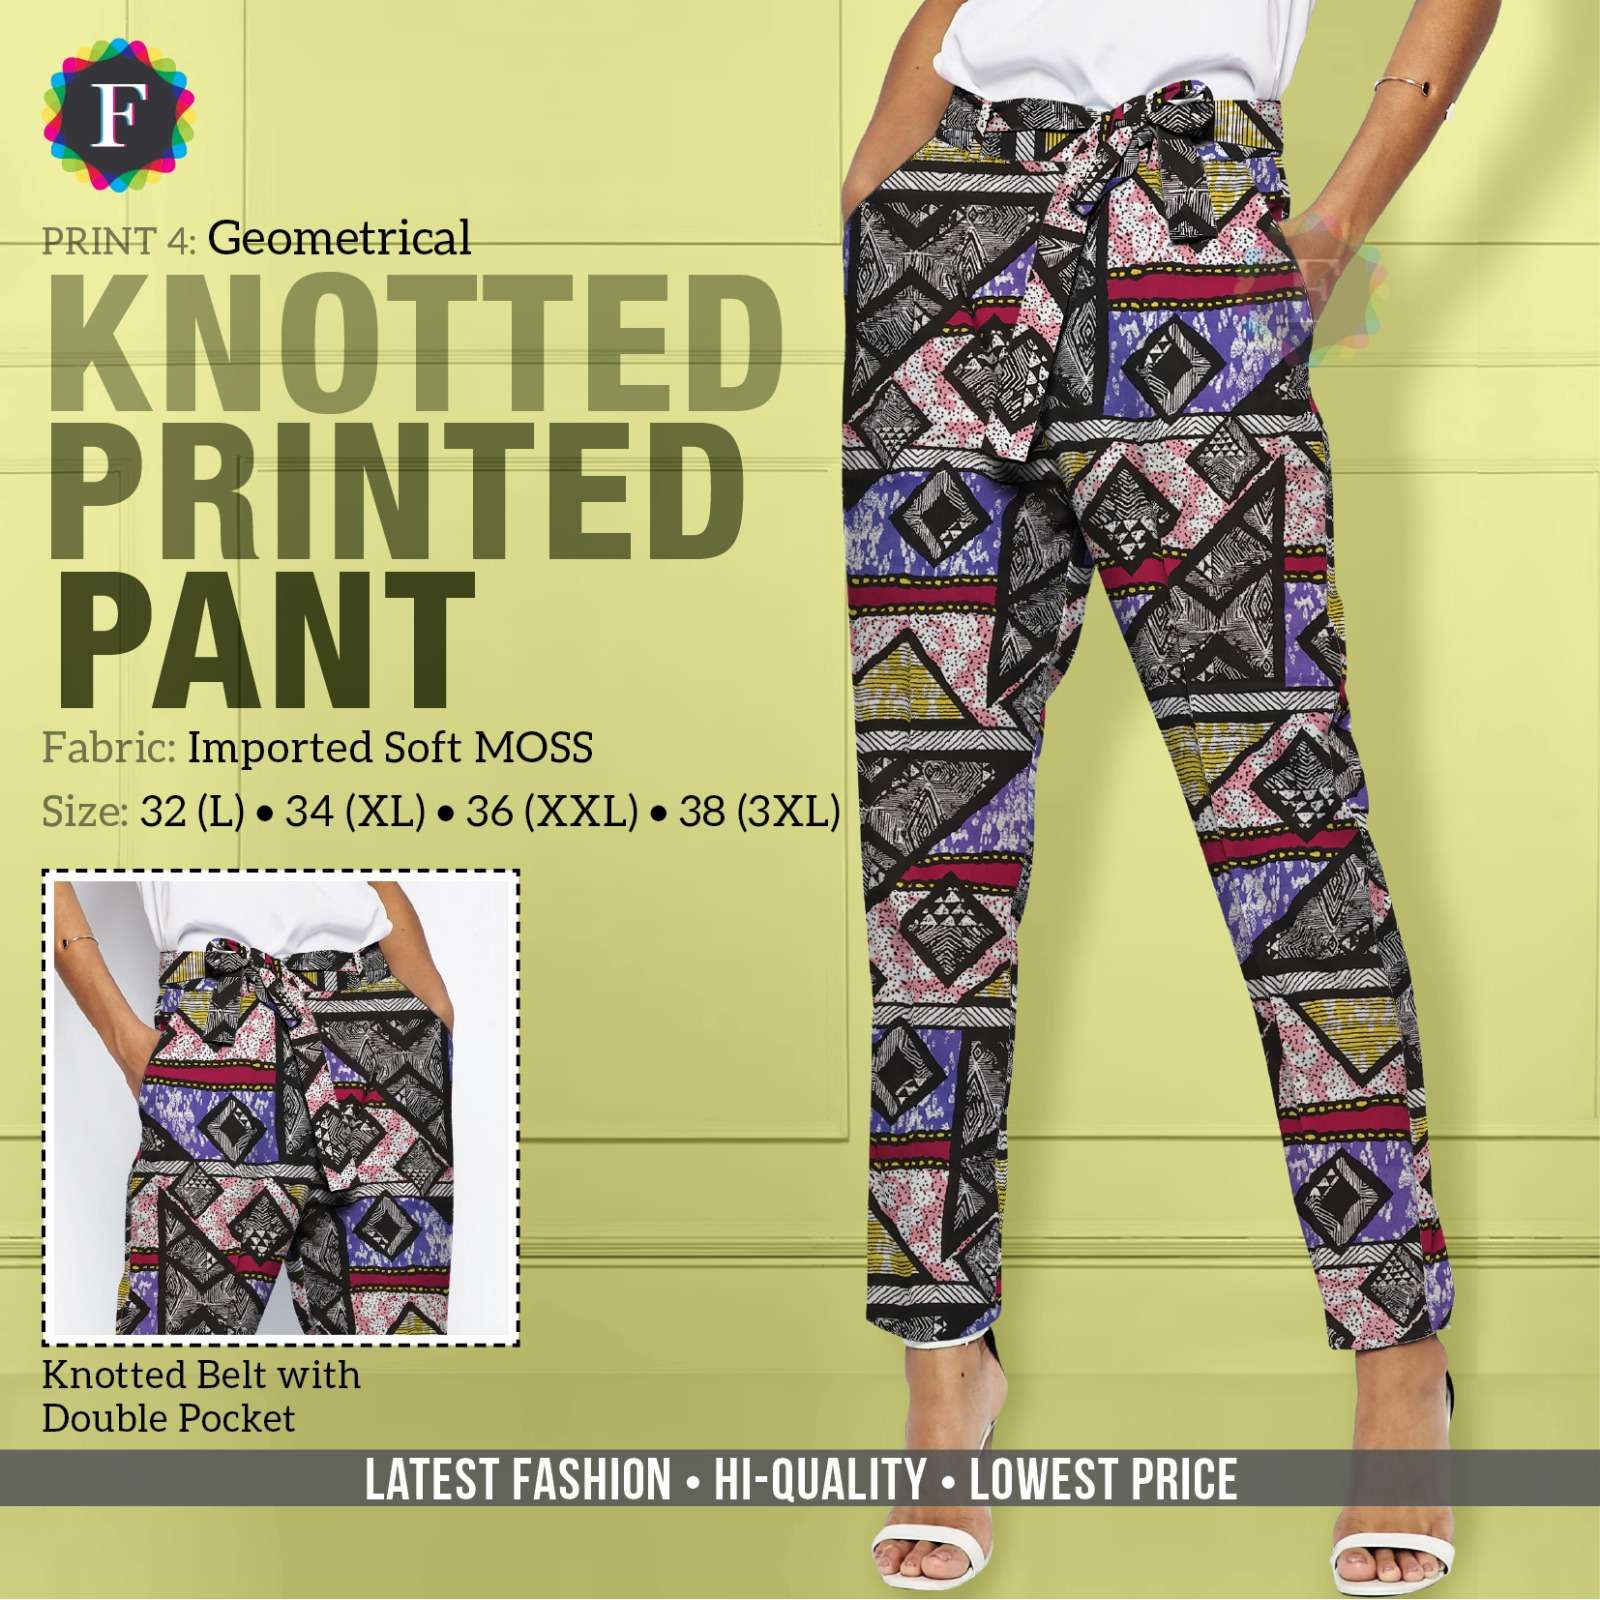 Knotted Printed Pant Western Wear Bottom Pants Collection